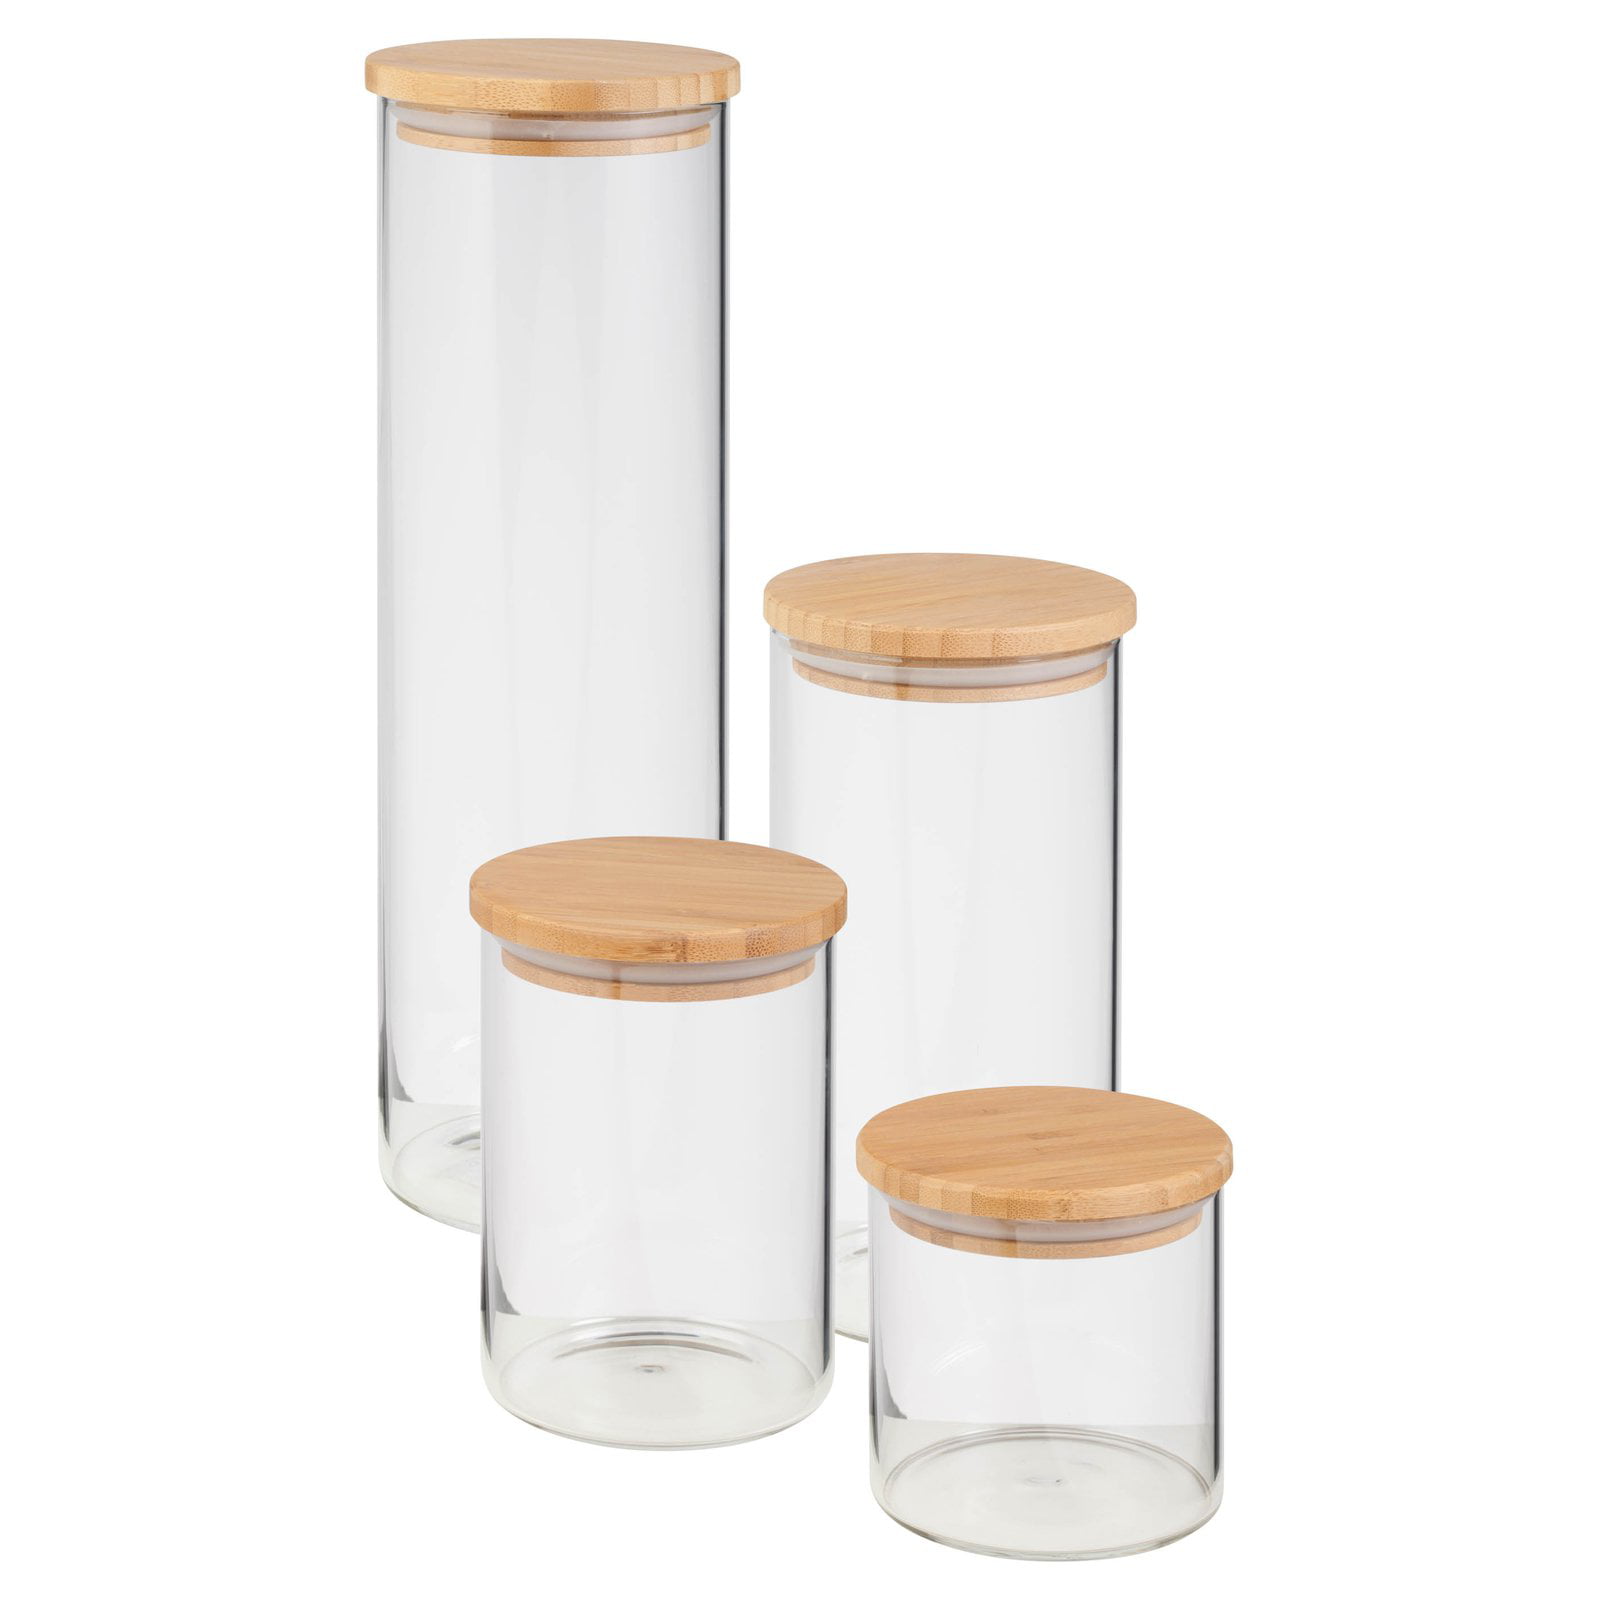 Shop Mainstays 4-Piece Glass Kitchen Canister Set with Bamboo Lids from Walmart on Openhaus